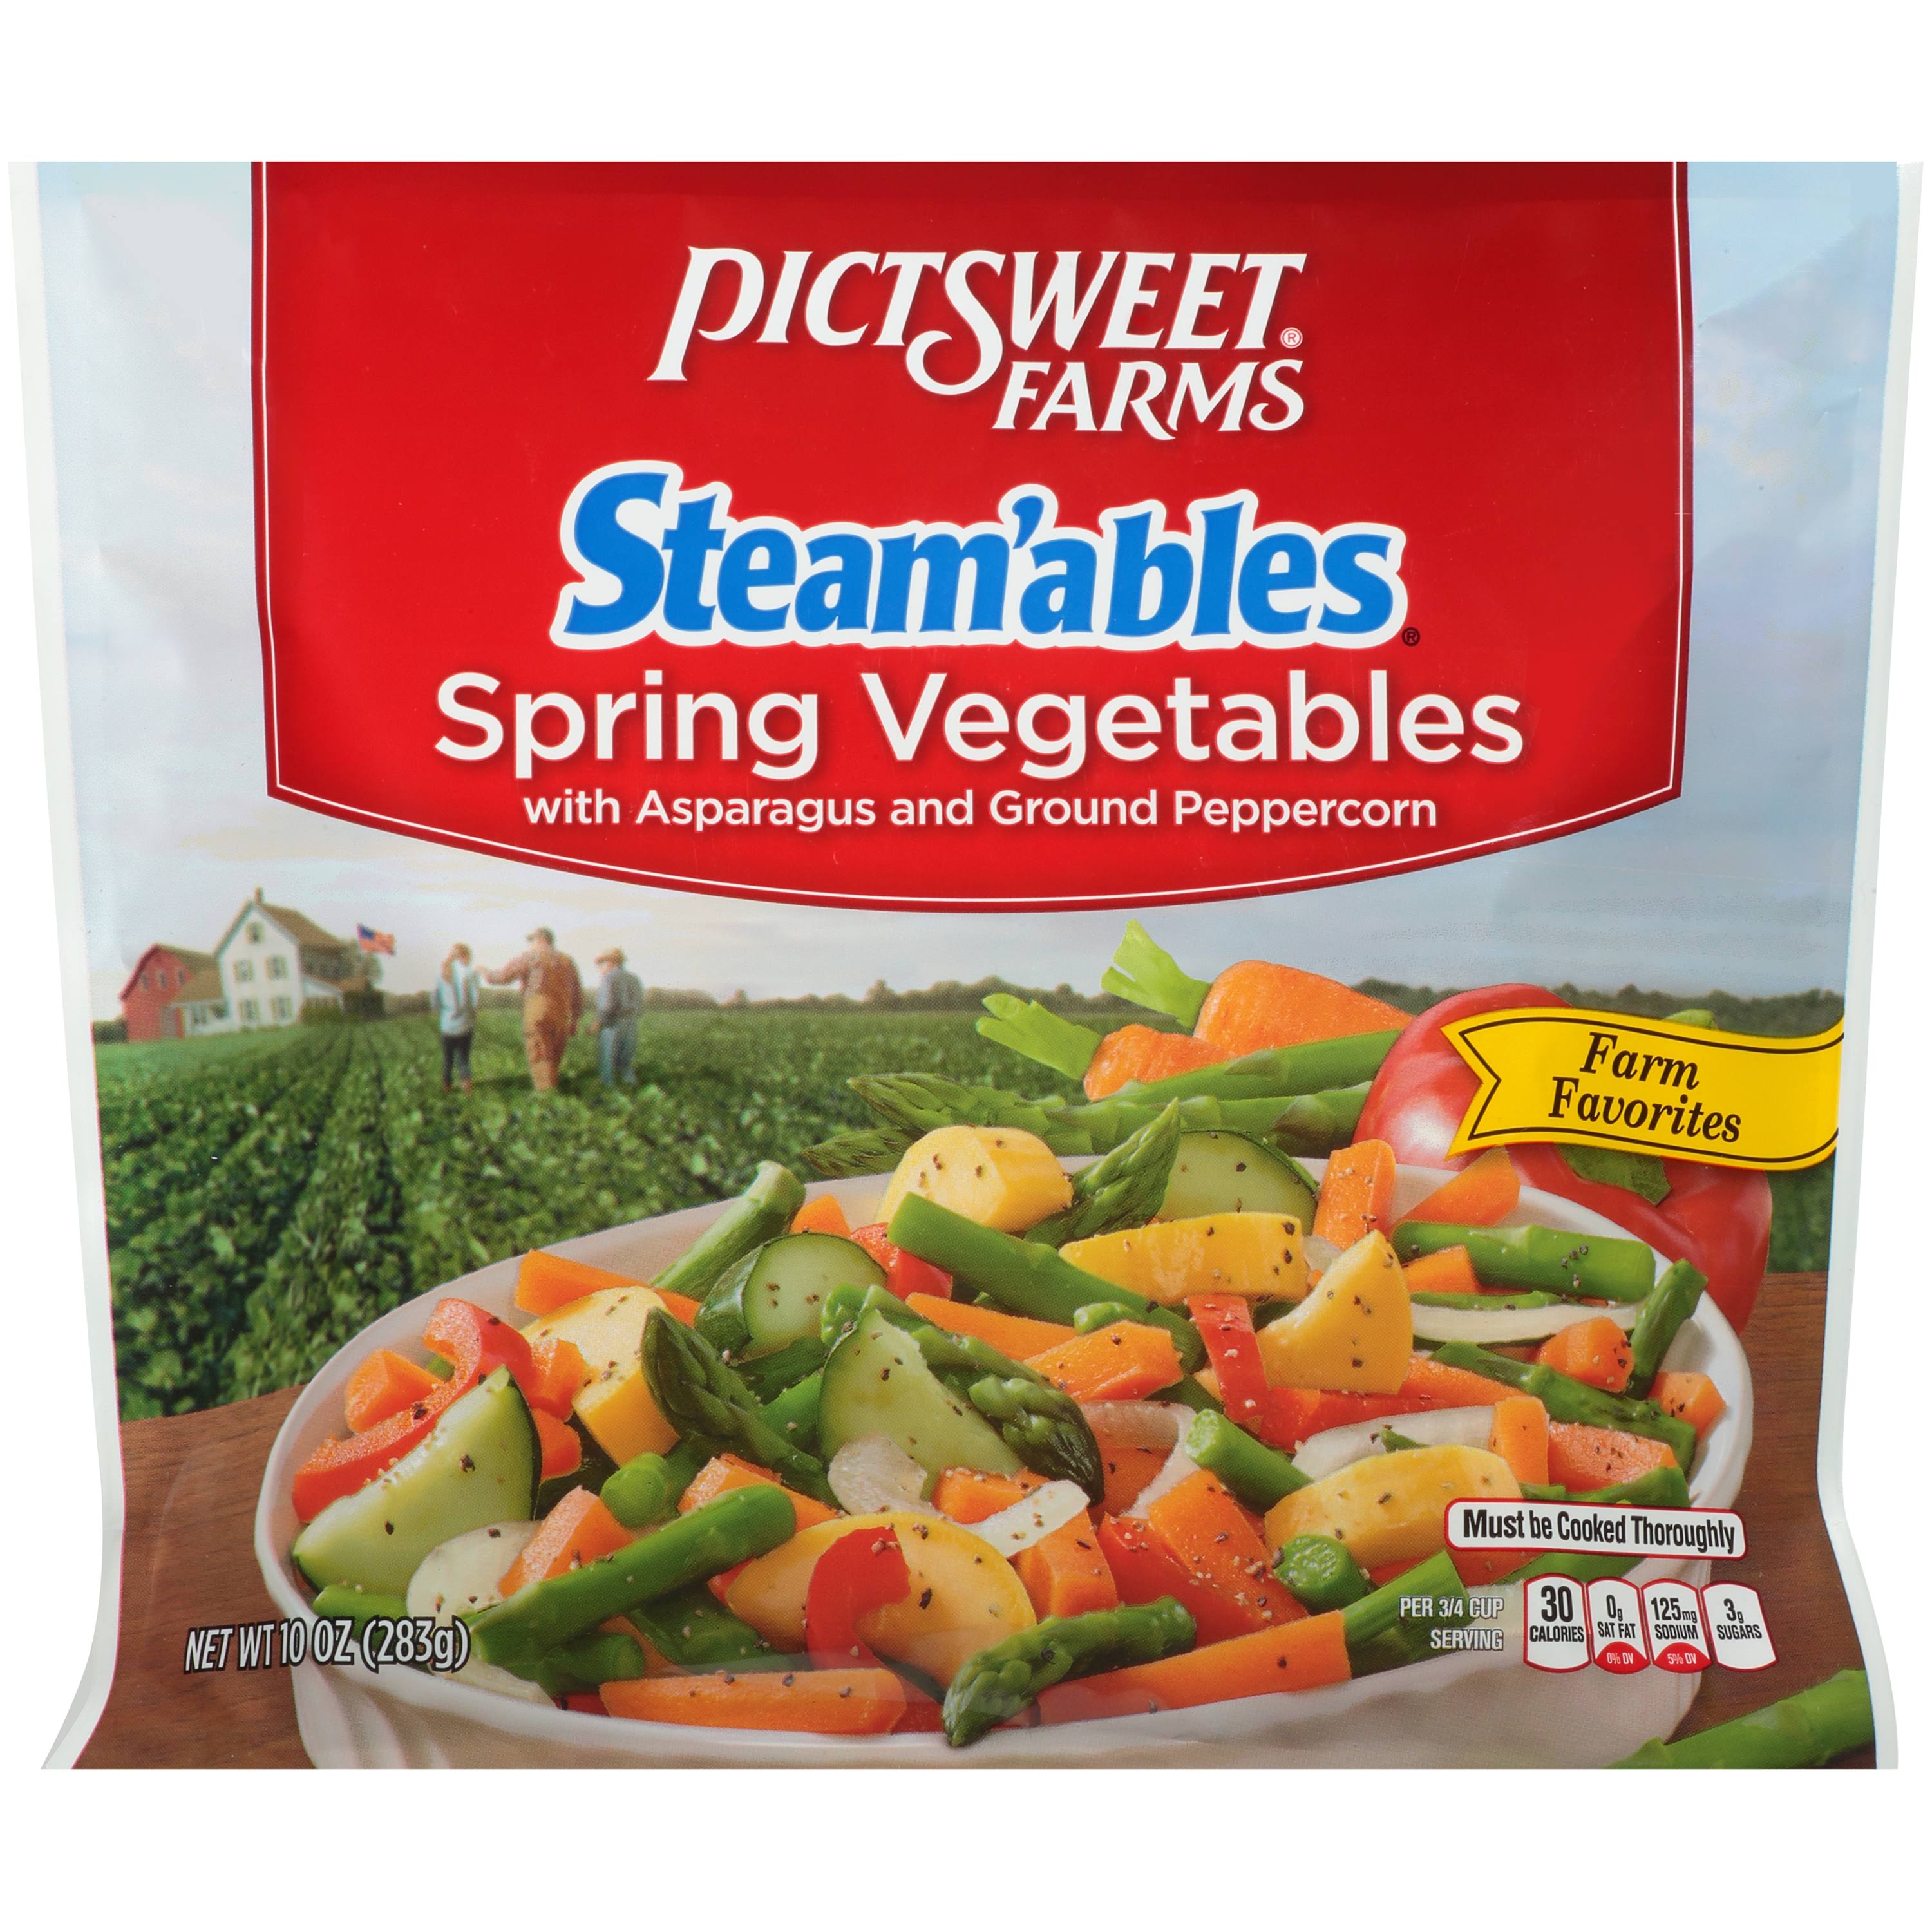 Pictsweet Farms Steam'ables Spring Vegetables - 10 oz